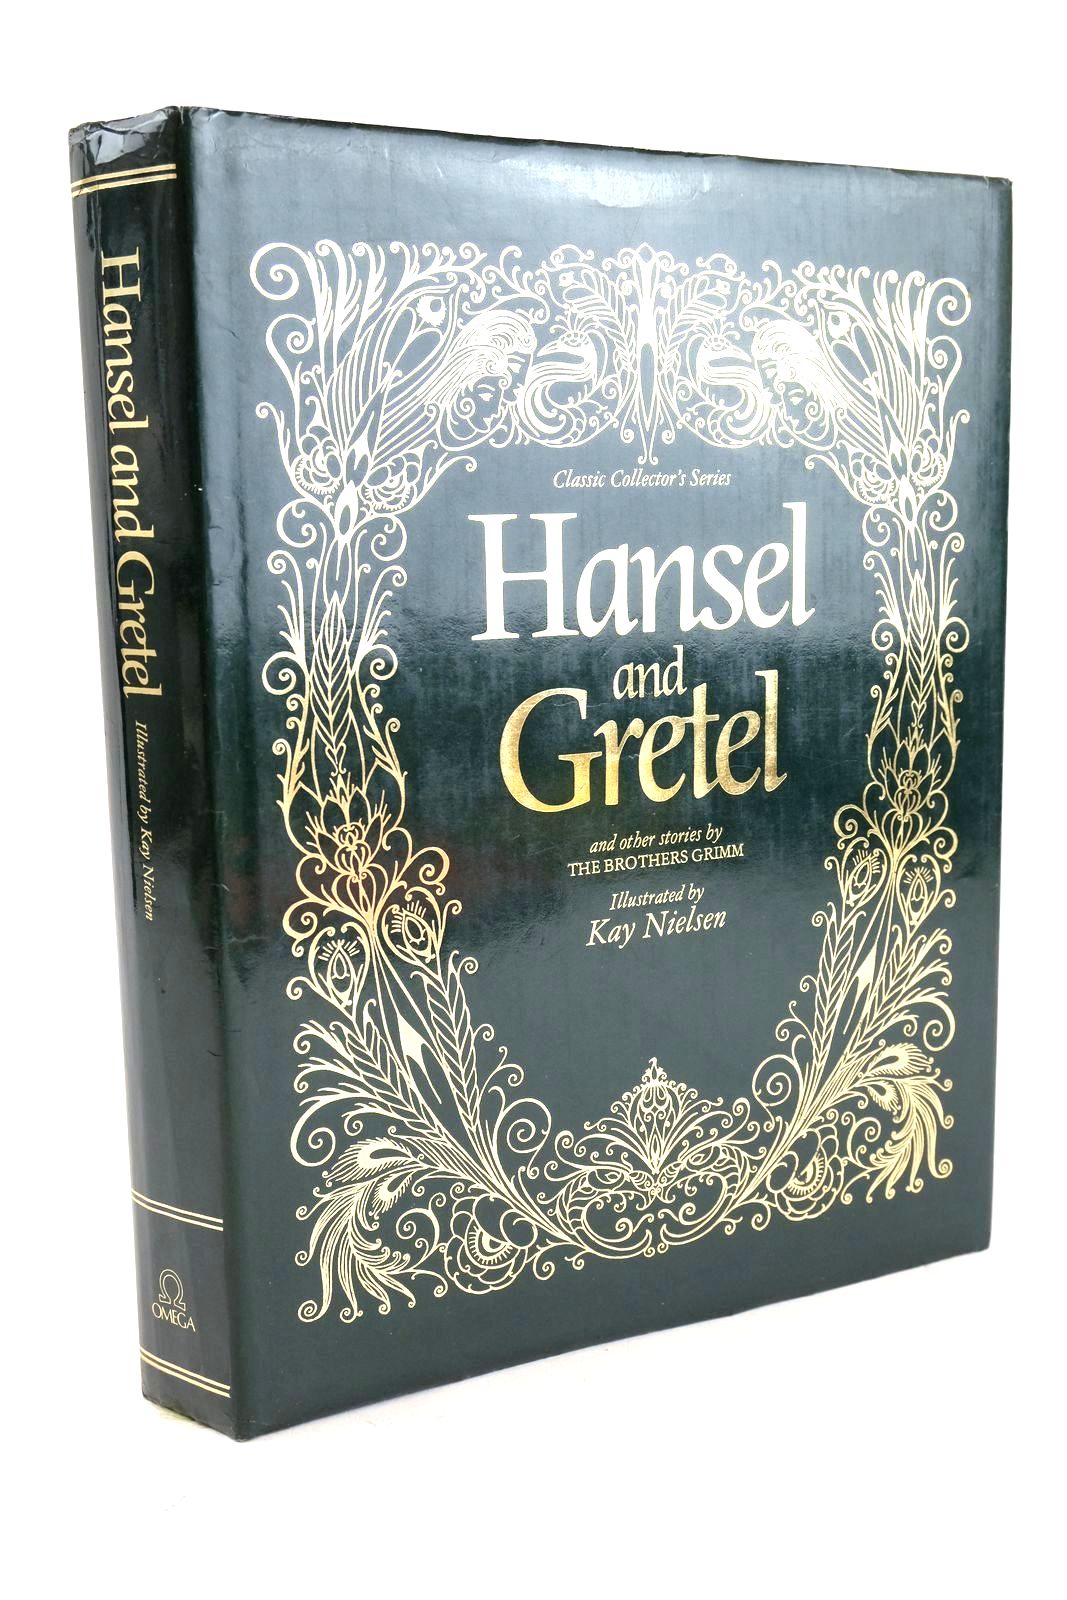 Photo of HANSEL AND GRETEL written by Grimm, Brothers illustrated by Nielsen, Kay published by Omega Books (STOCK CODE: 1327528)  for sale by Stella & Rose's Books